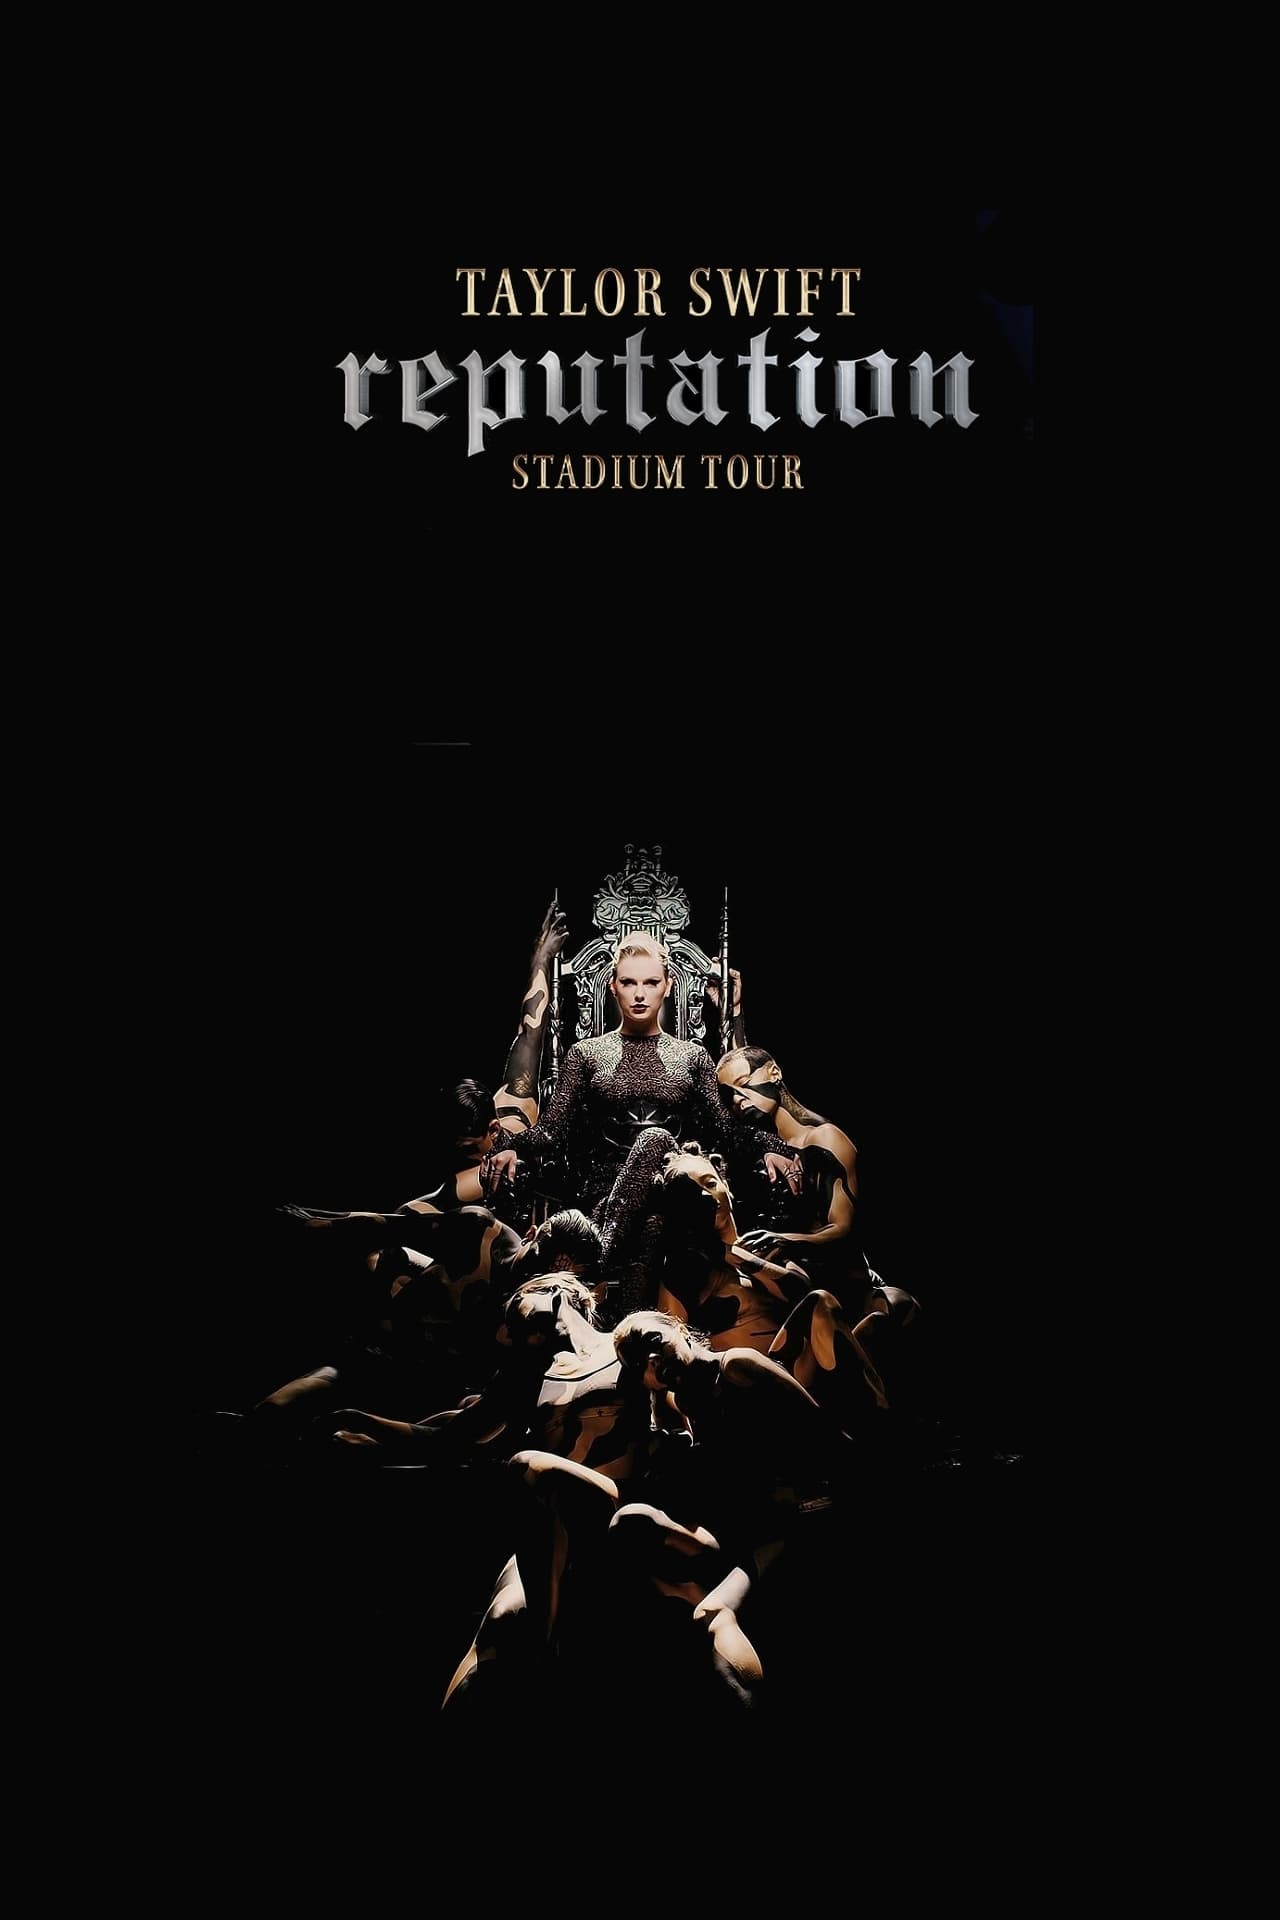 Taylor Swift Reputation Stadium Tour 2018 Posters The